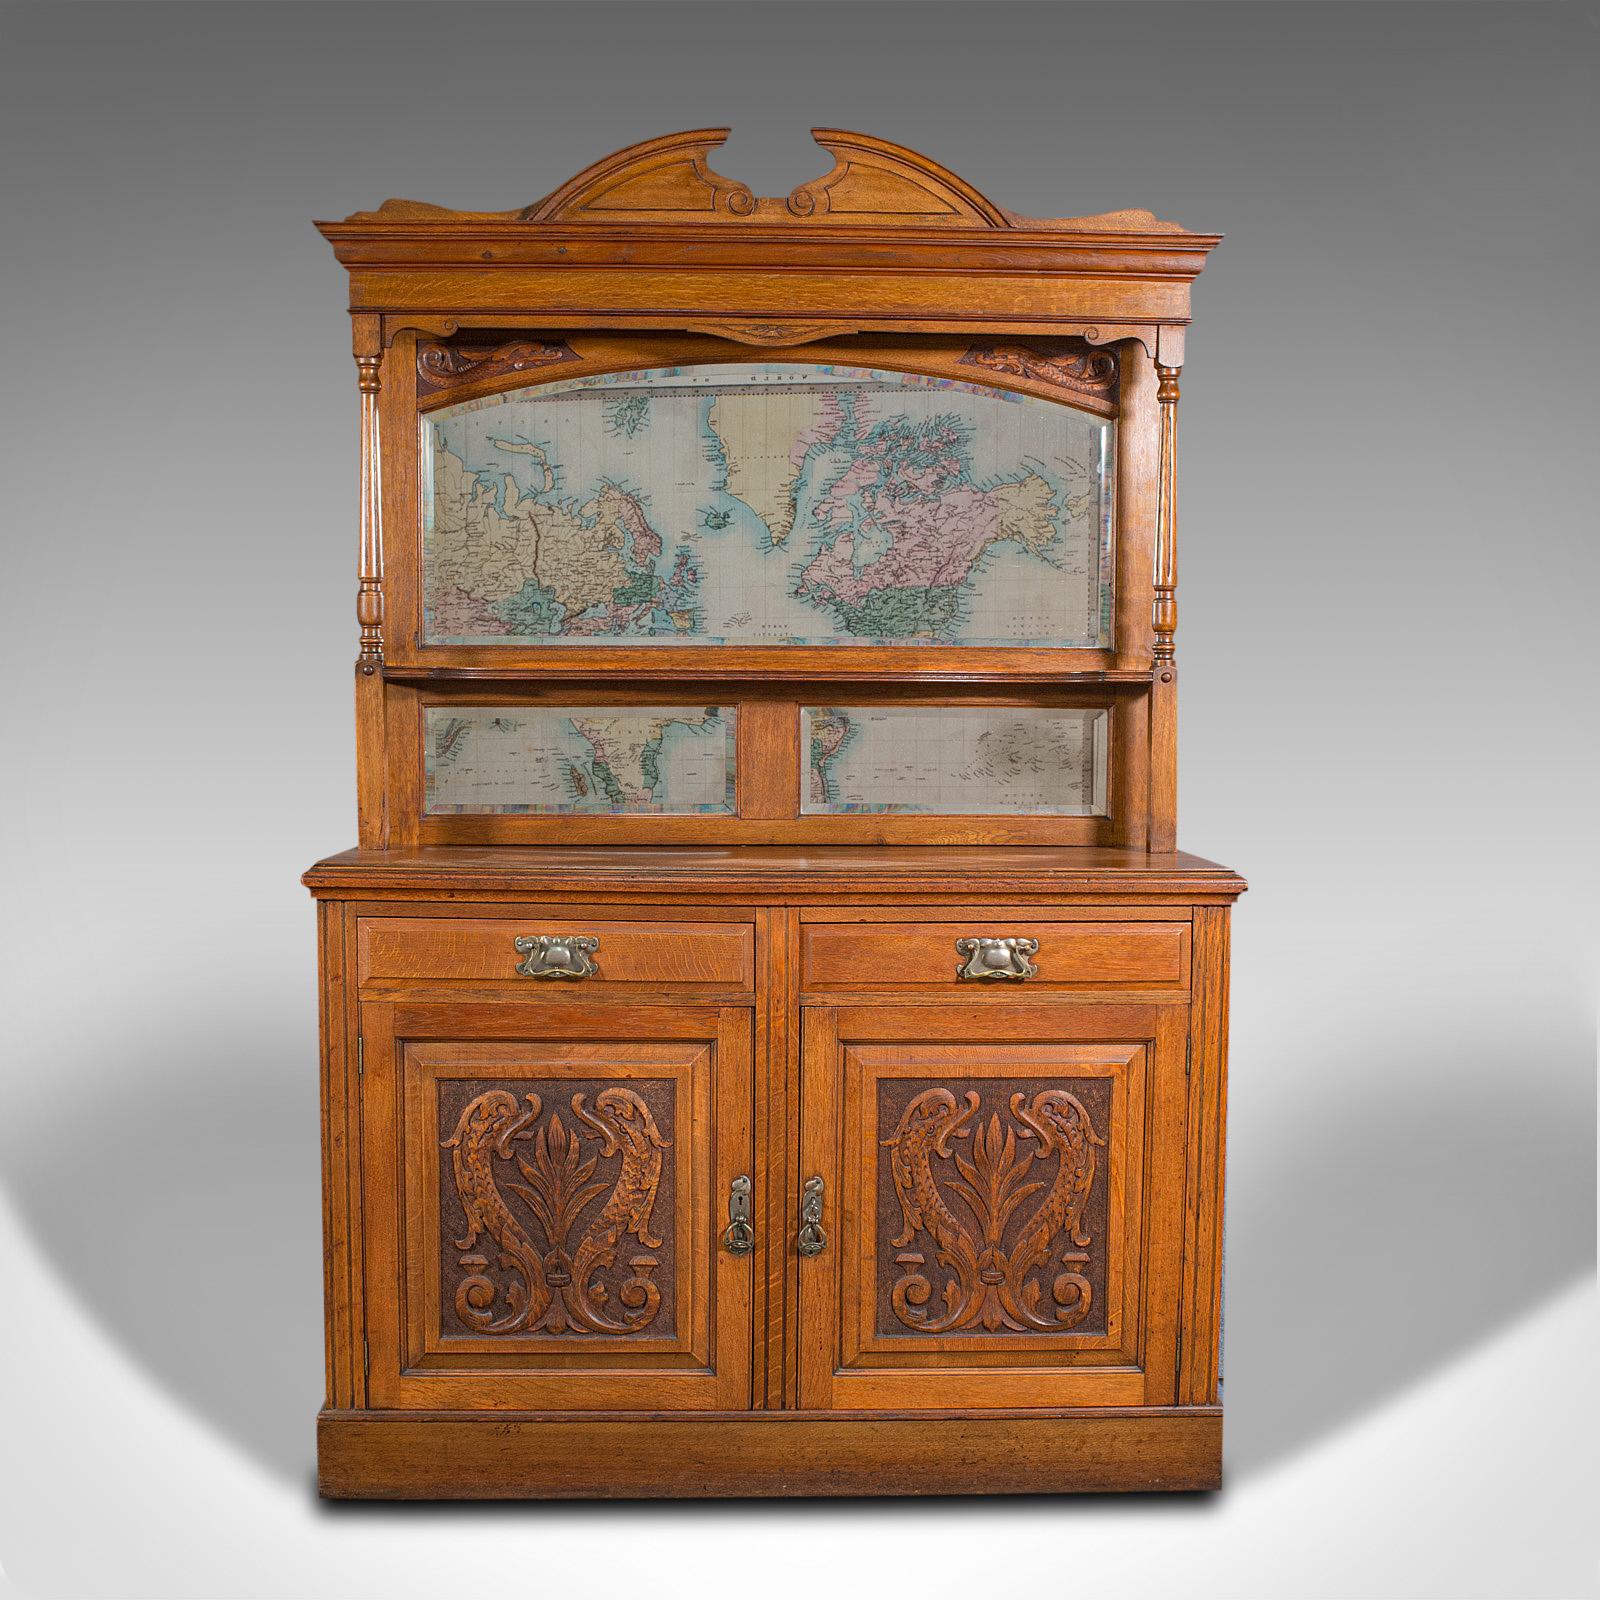 This is a large antique sideboard. An English, oak mirror back cabinet, dating to the Arts & Crafts movement during the late Victorian period, circa 1900.

Imperious proportion with elegant craftsmanship
Displays a desirable aged patina and